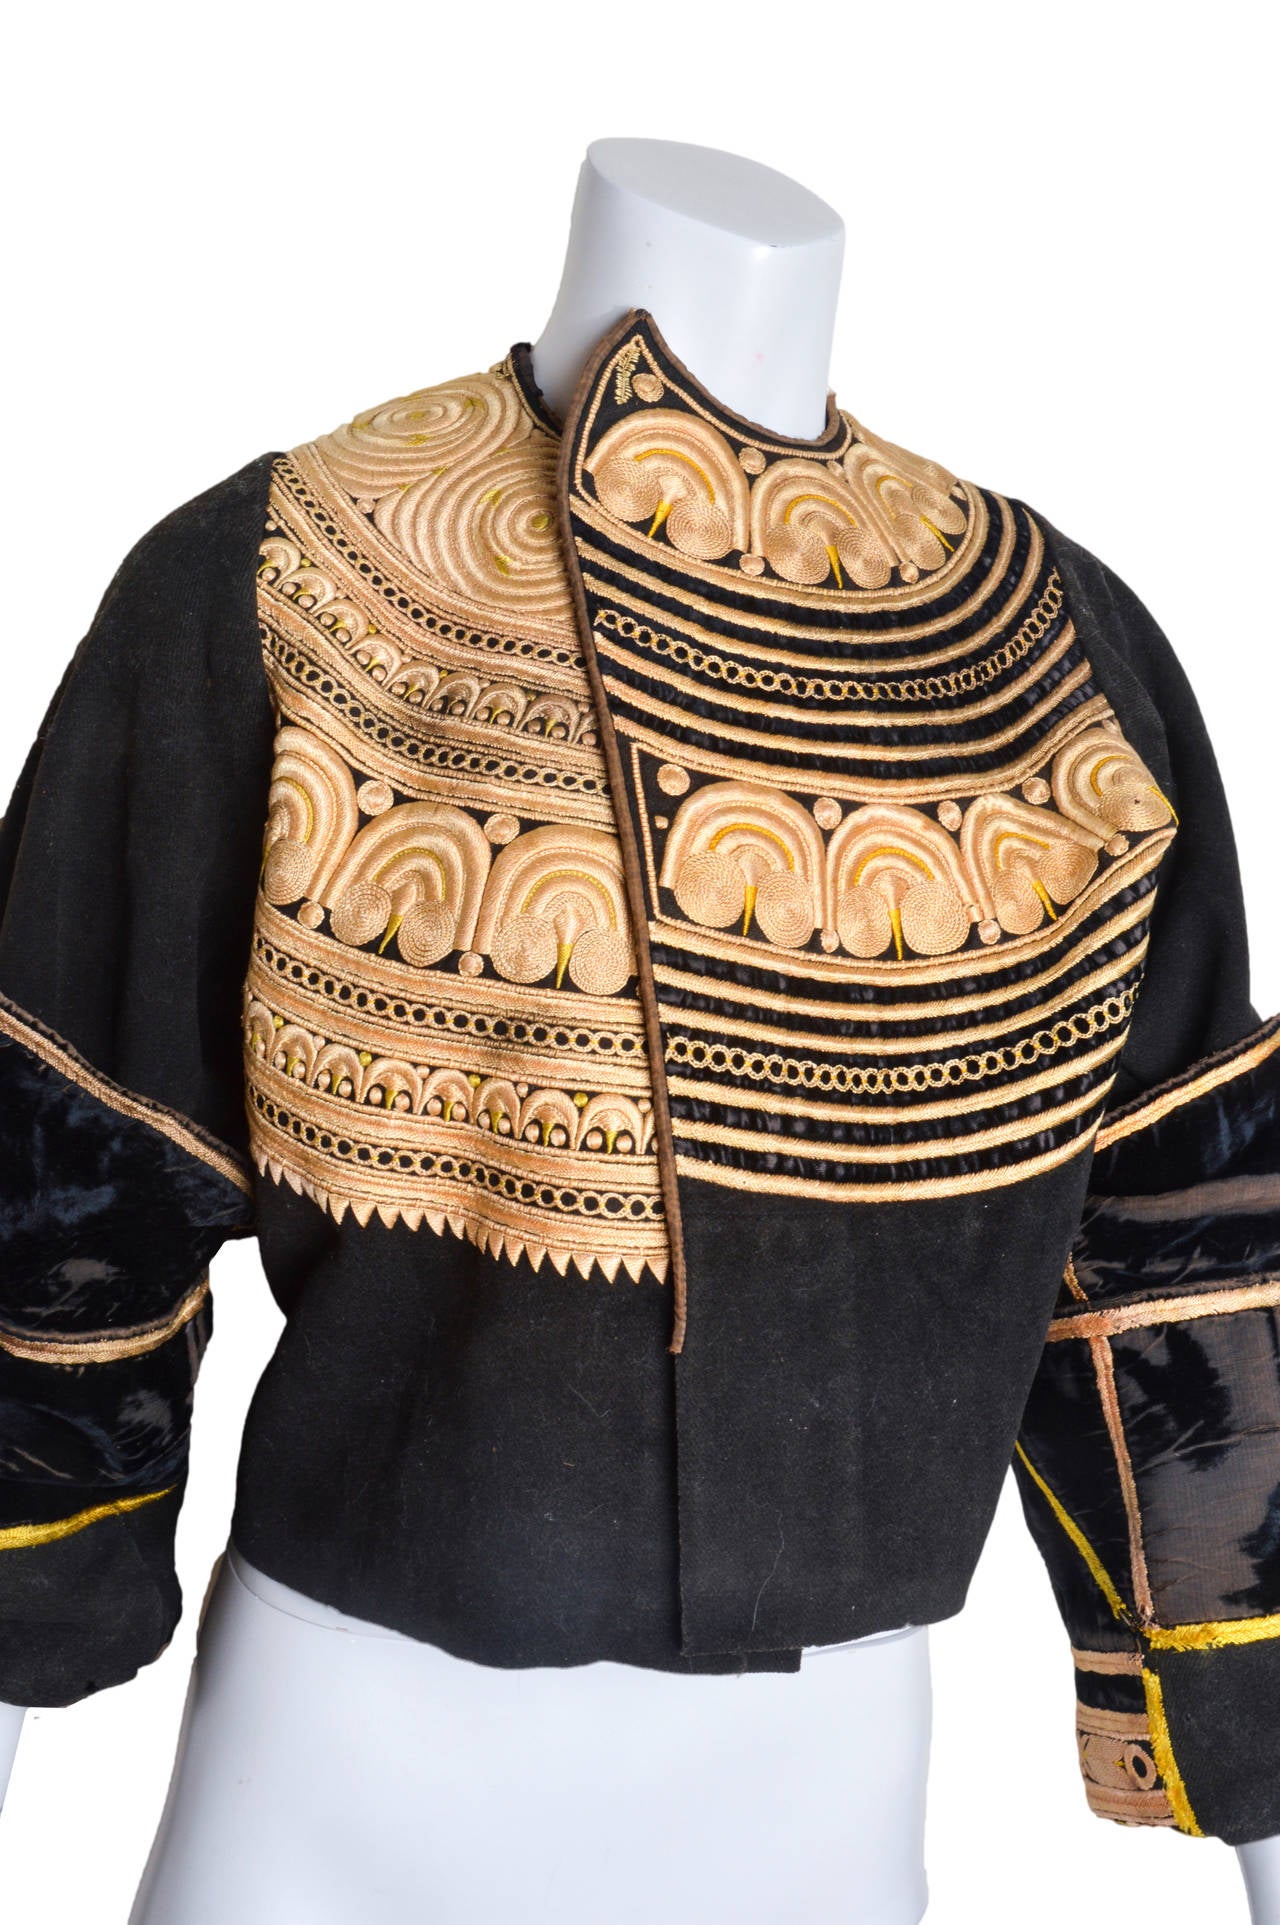 Truly of work of art and great care.
Very early, exact age and origin unknown.
Perhaps Edwardian? Late 1800's-early 1900's.
Possibly military regalia.
Black wool, hand stitched and hand embroidered.
Intricate and very precise gold